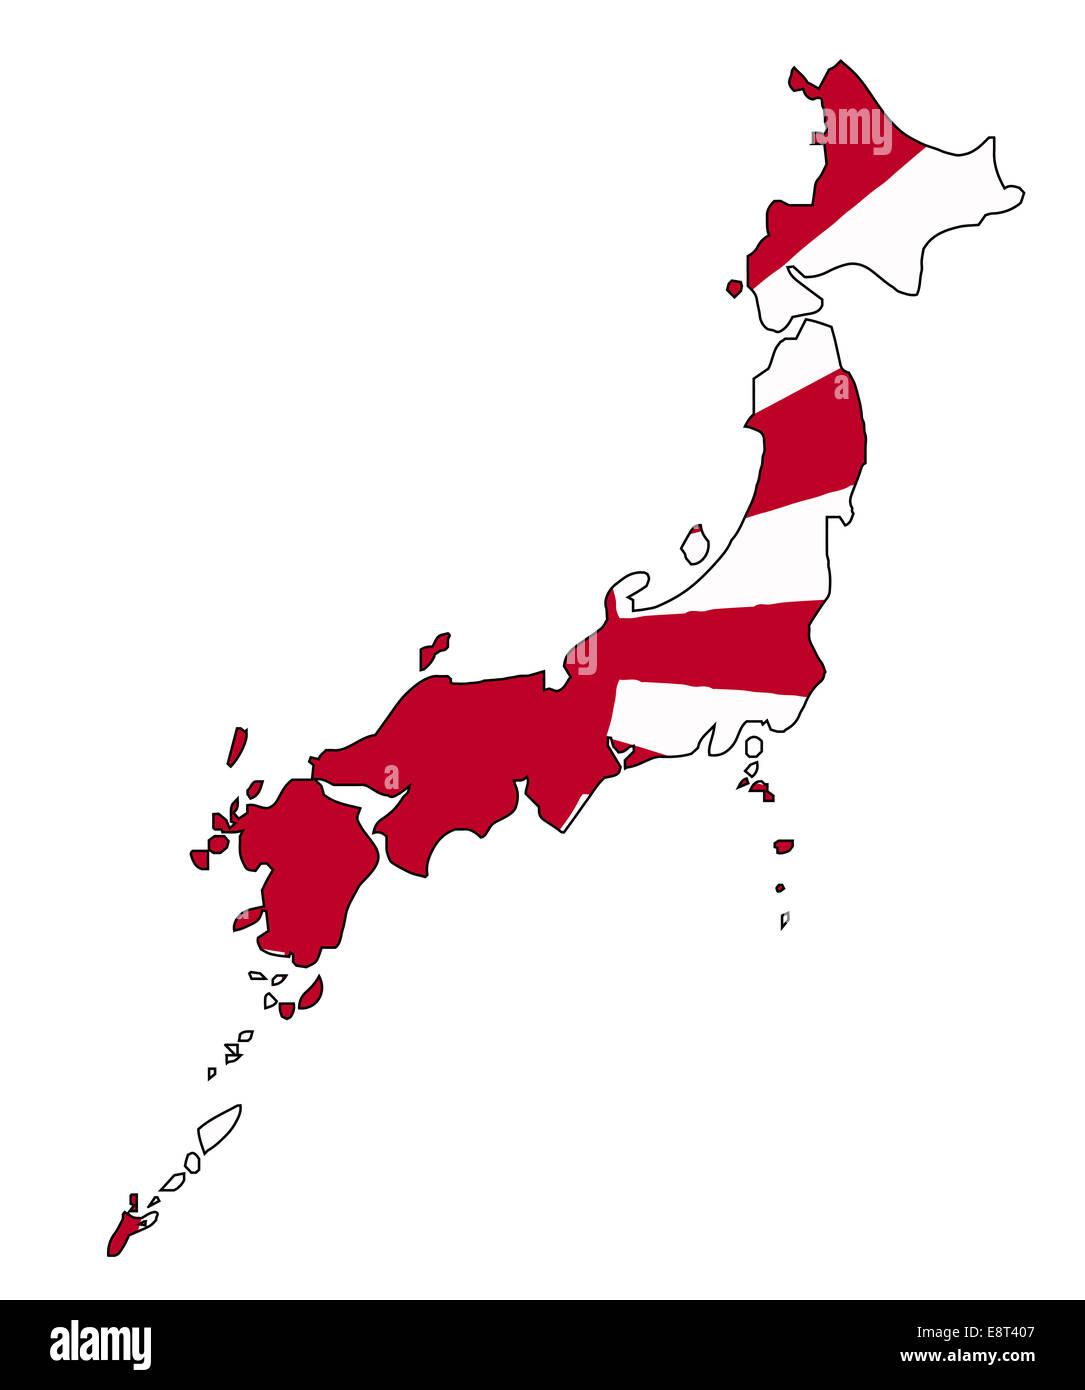 Outline map of Japan isolated over red and white Japanese rising sun flag Stock Photo